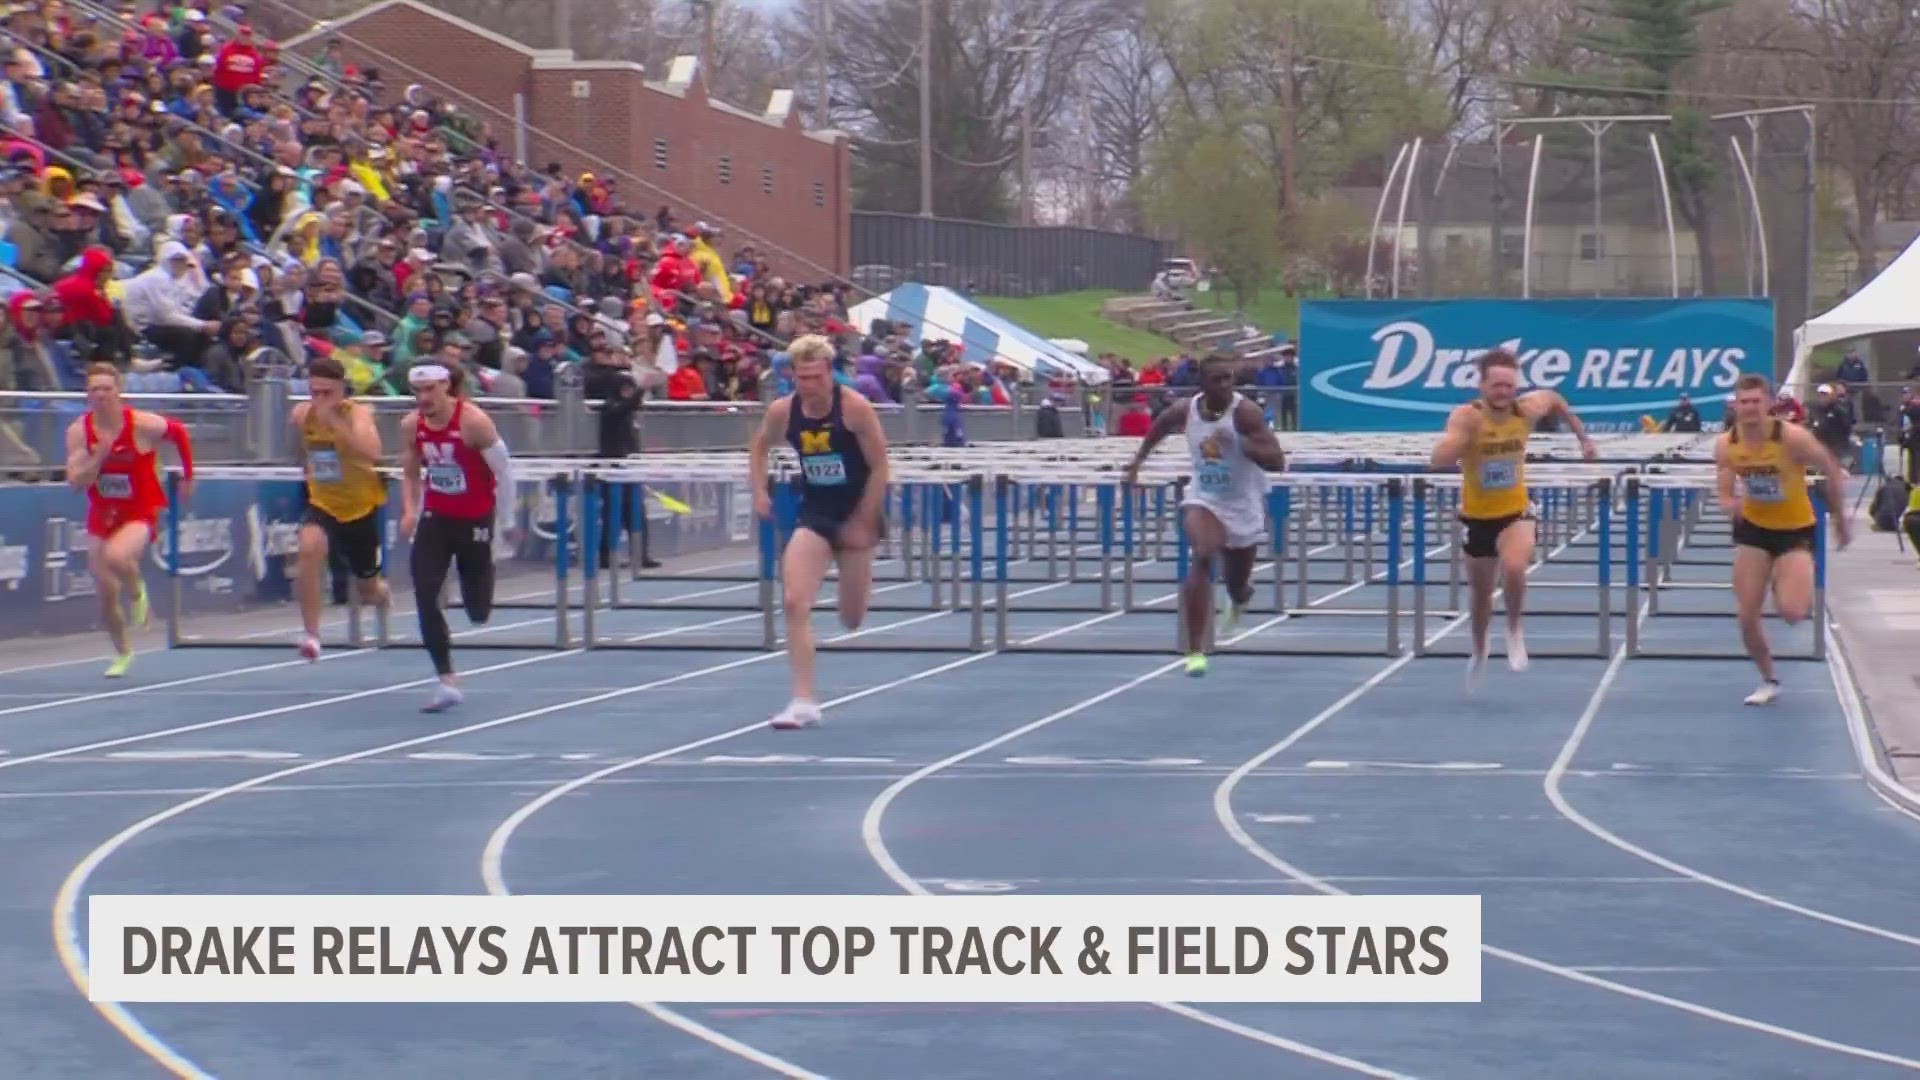 Considered America's Athletic Classic, the Drake Relays have featured not only some of the best athletes in the country, but in the world.